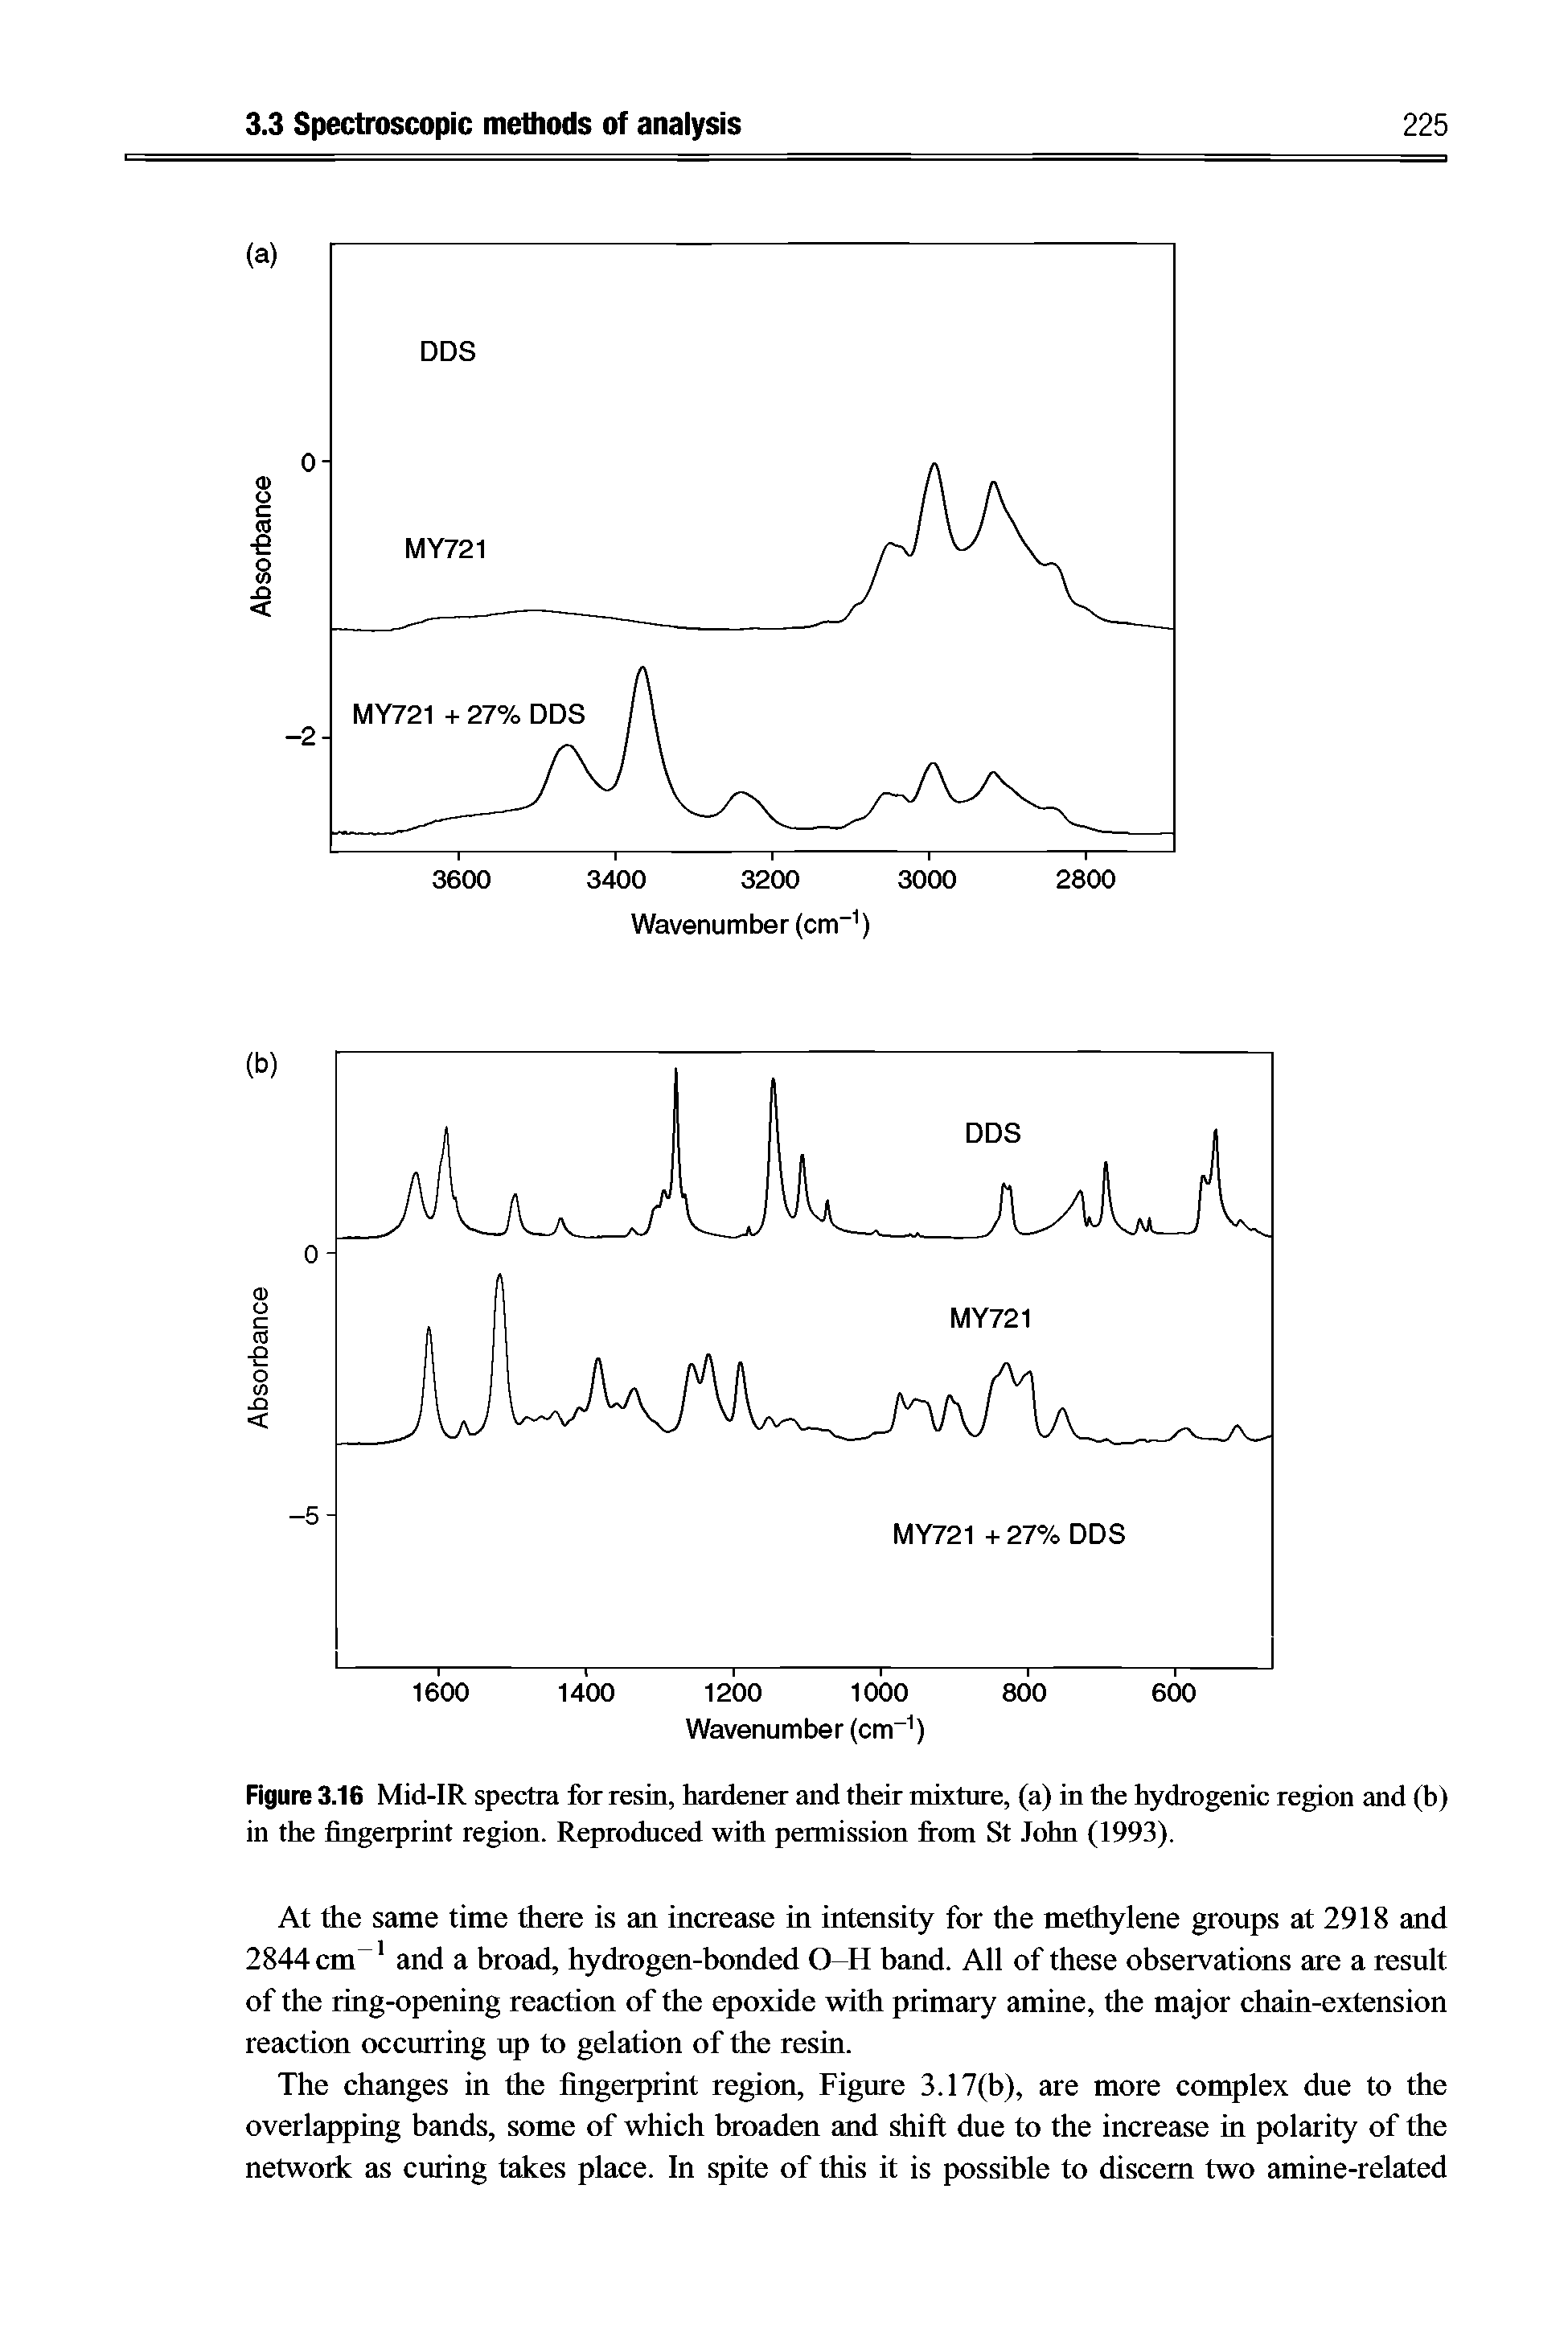 Figure 3.16 Mid-IR spectra for resin, hardener and their mixture, (a) in the hydrogenic region and (h) in the fingerprint region. Reproduced with permission from St John (1993).